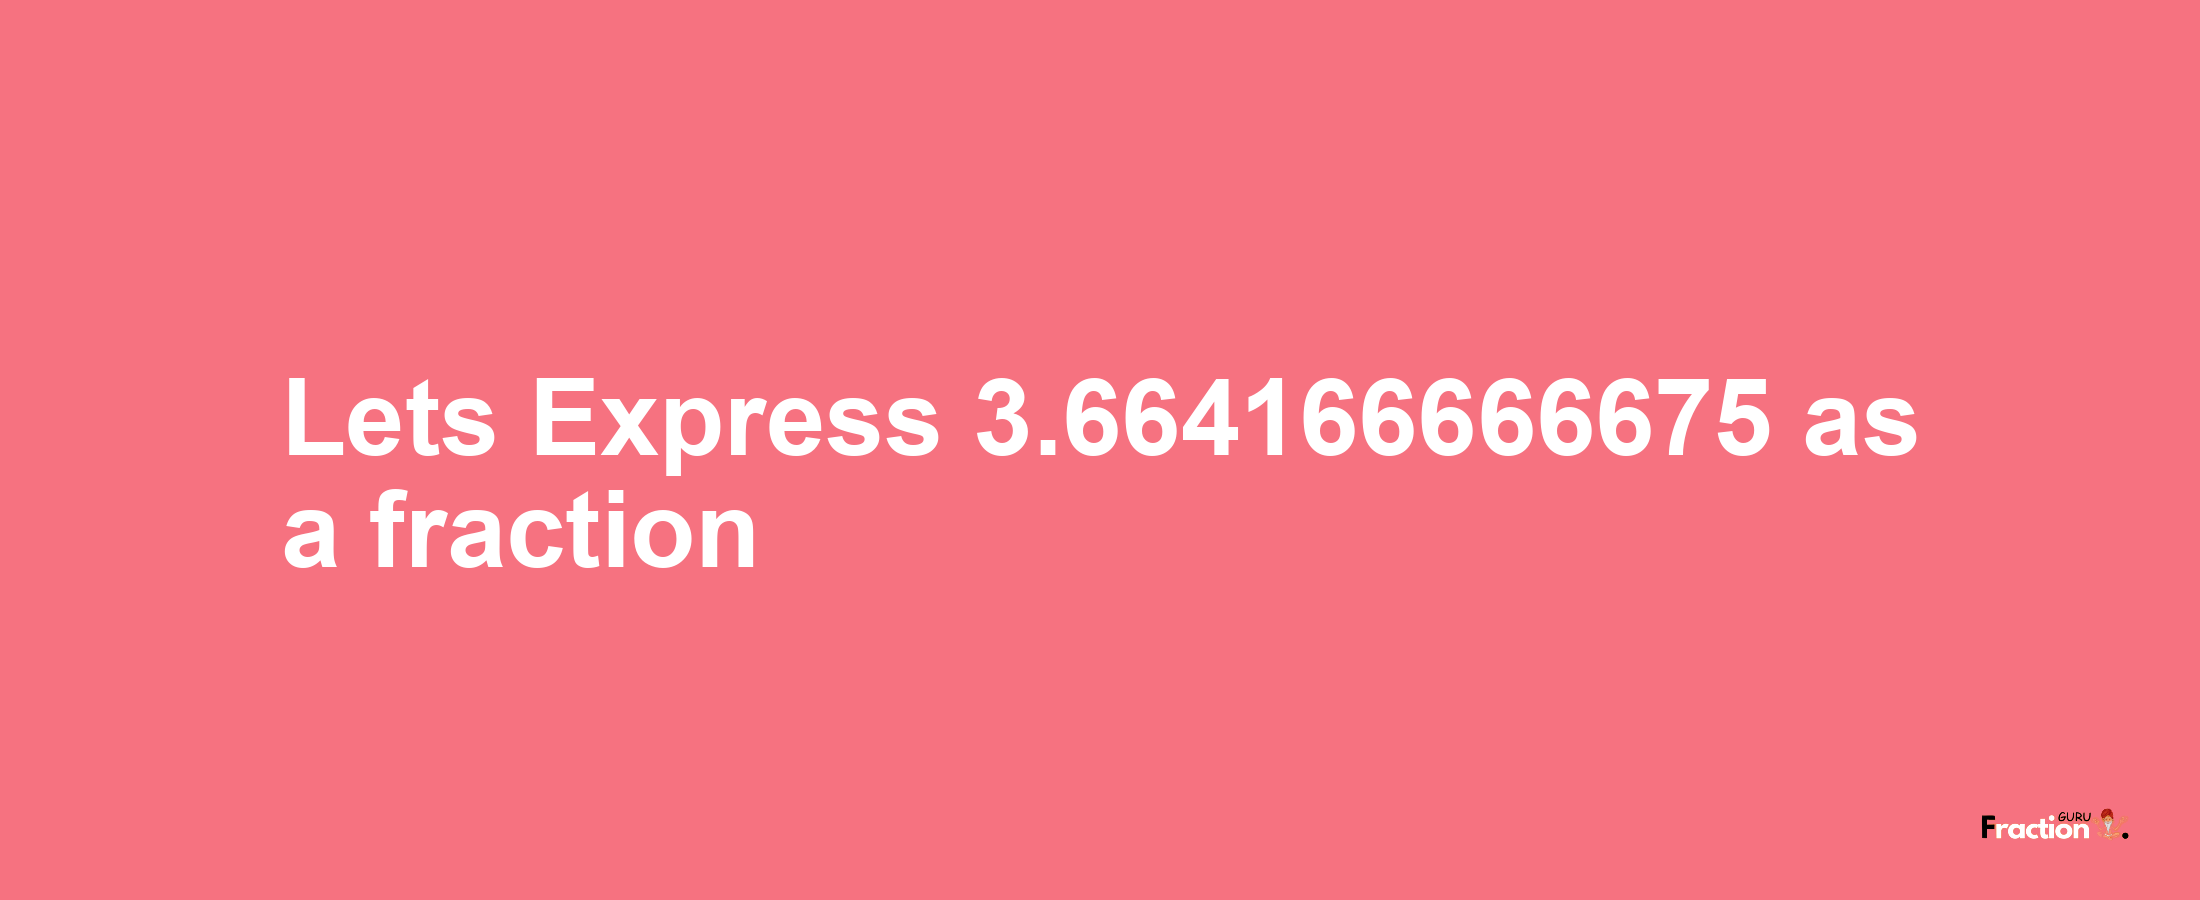 Lets Express 3.664166666675 as afraction